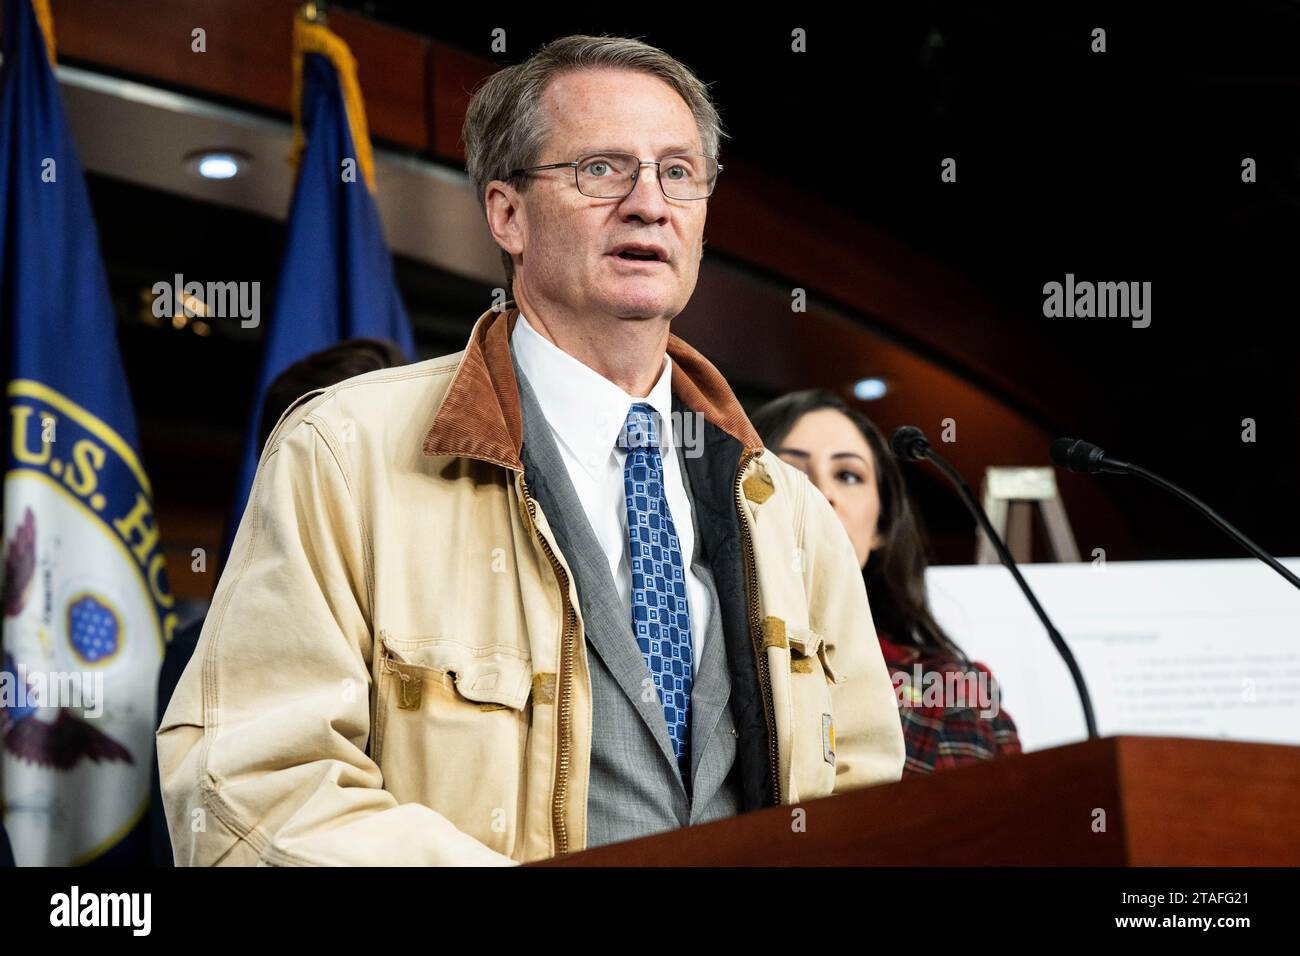 Washington, United States. 30th Nov, 2023. U.S. Representative Tim Burchett (R-TN) speaking at a press conference about government transparency about Unidentified Aerial Phenomena (UAP) at the U.S. Capitol. (Photo by Michael Brochstein/Sipa USA) Credit: Sipa USA/Alamy Live News Stock Photo